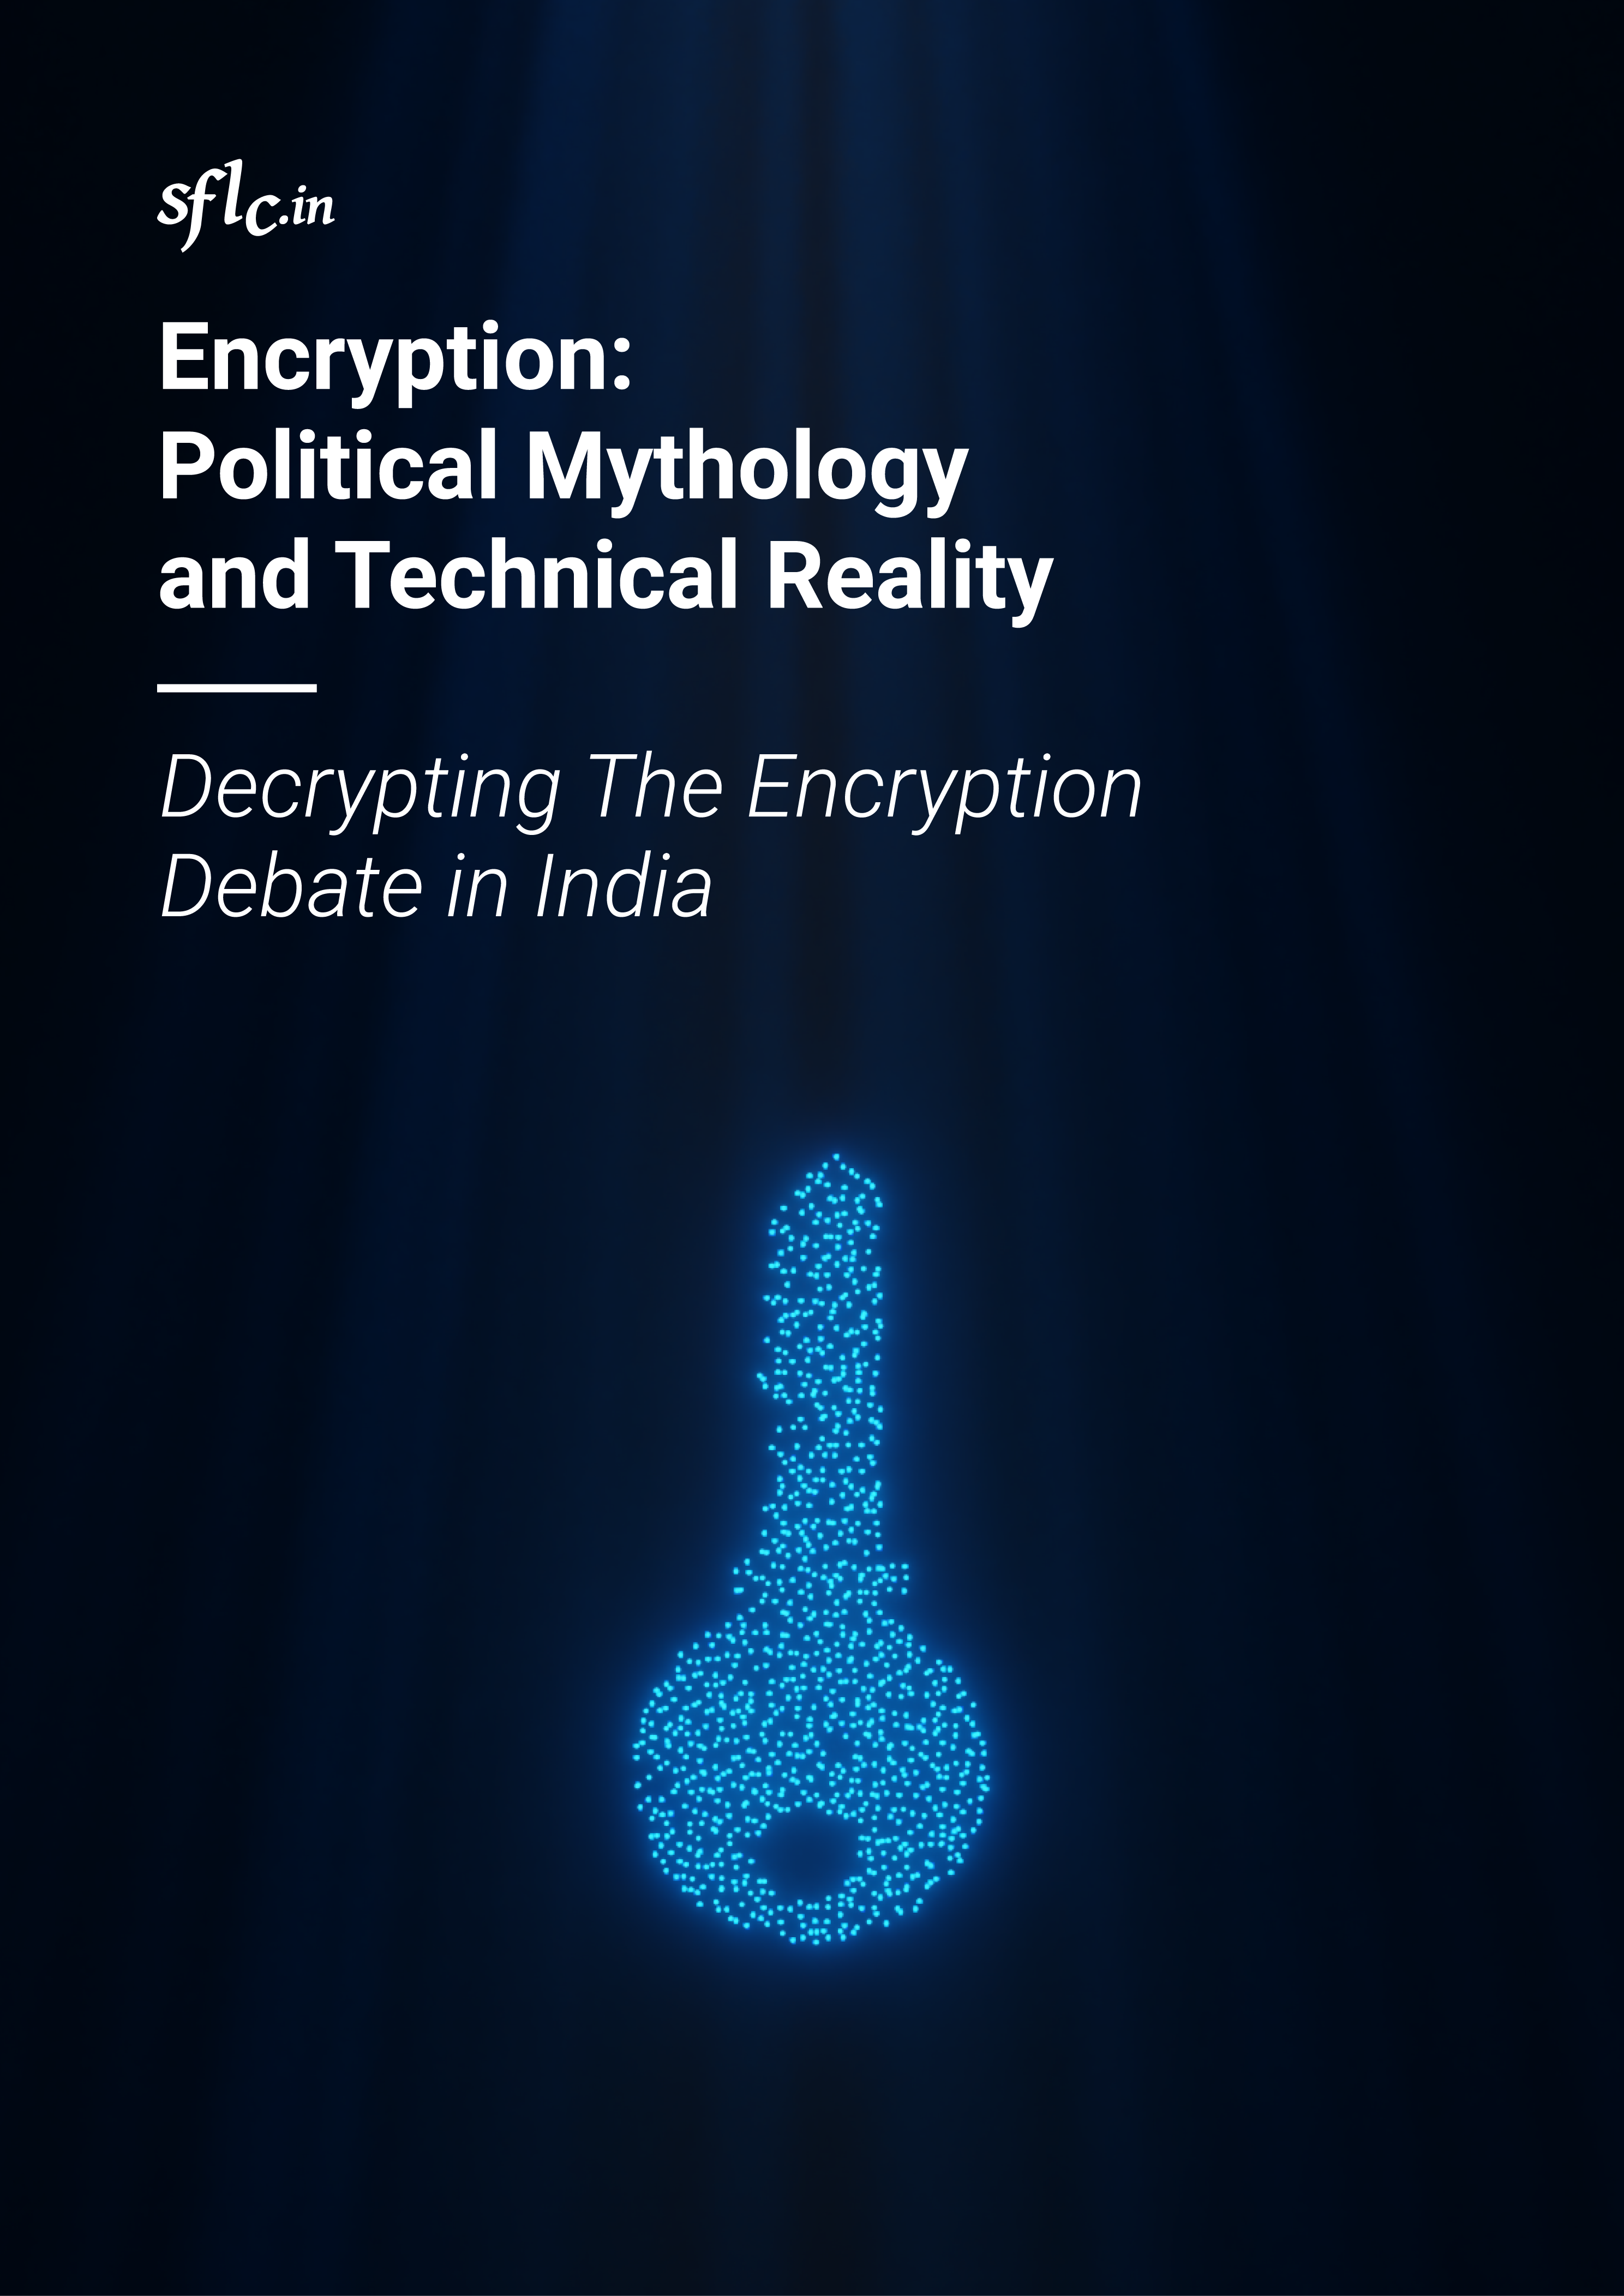 Encryption: Political Mythology and Technical Reality – Decrypting the Encryption debate in India.